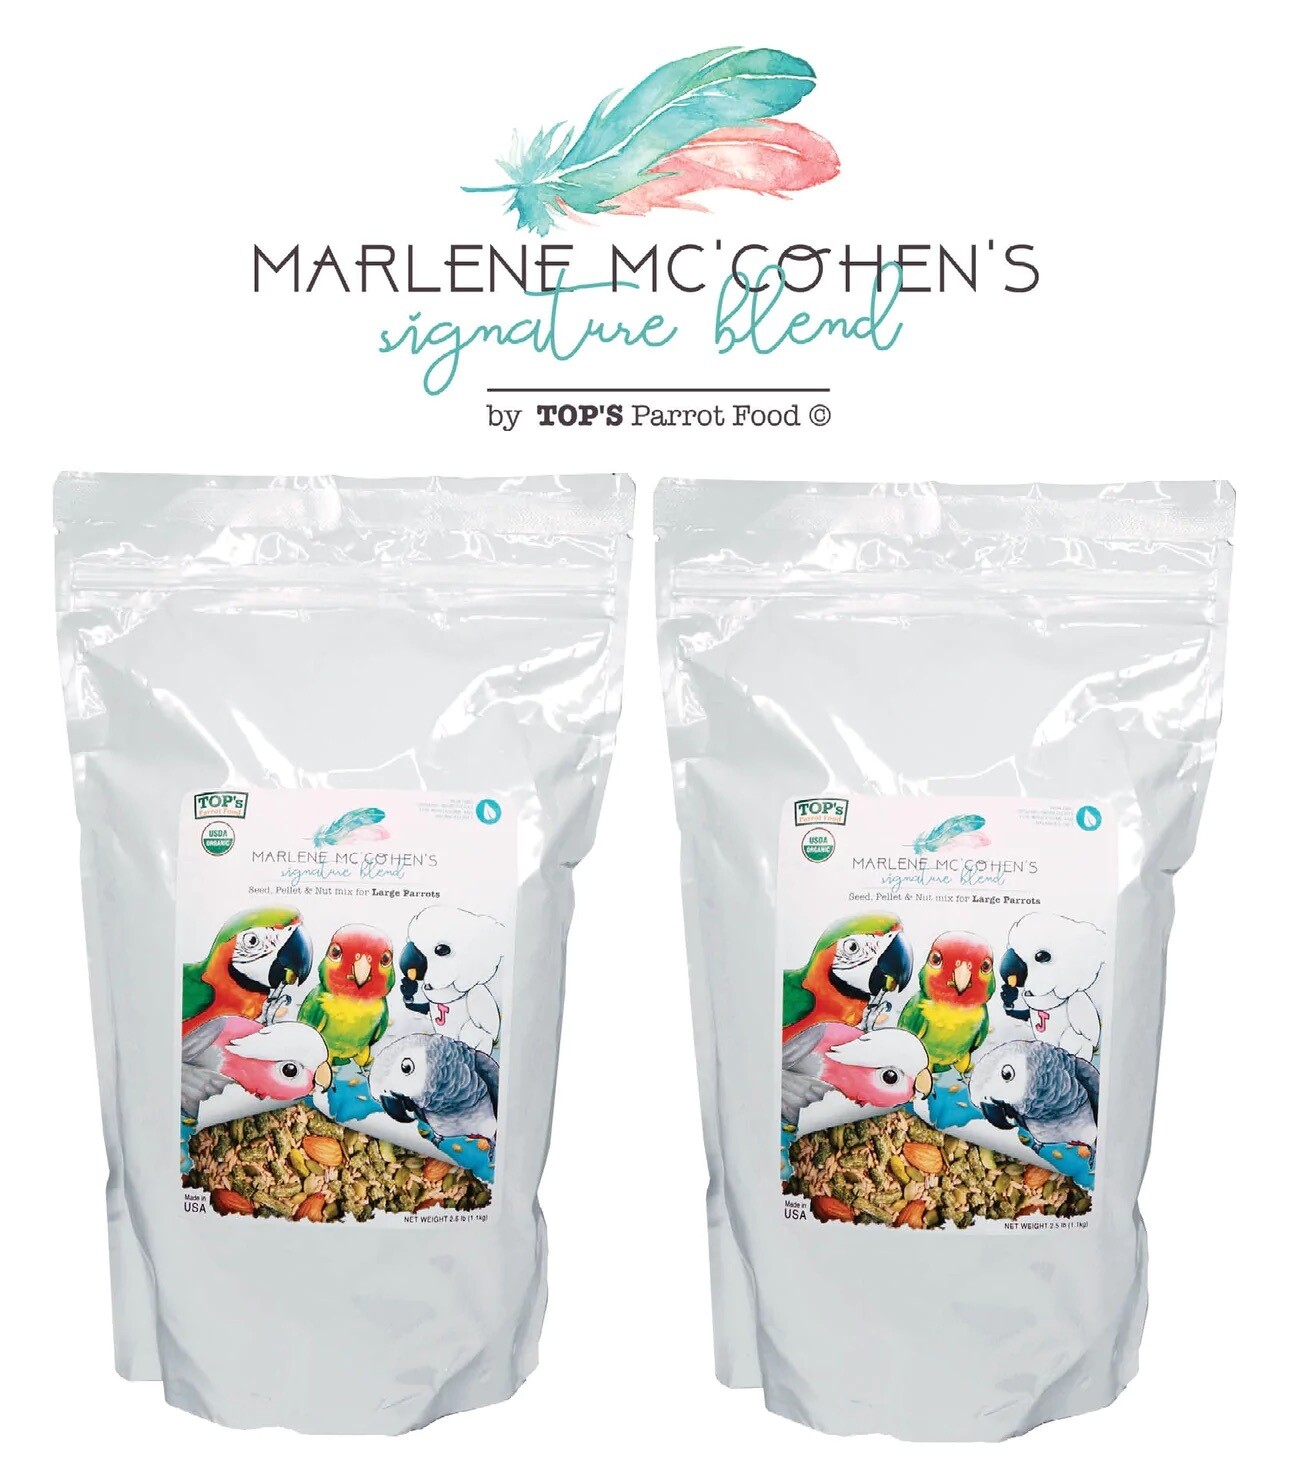 2 Pack Marlene Mc'Cohen's Signature Blend by TOPs Parrot Food - Mix of TOPs pellets, seed mixes and nuts for Large Size Birds 5 Lbs total